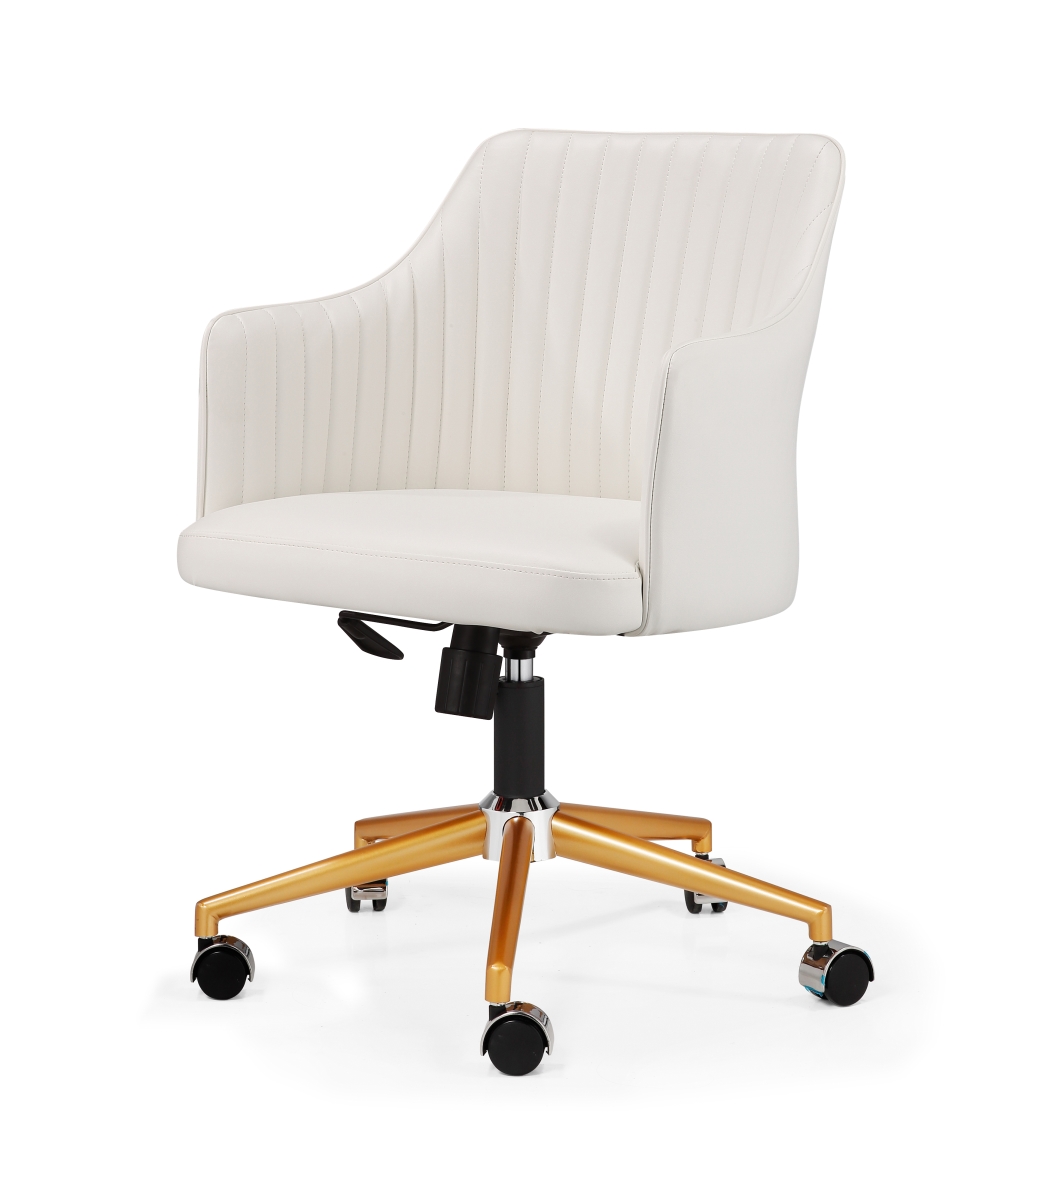 64-gd-whi M64 Flock Office Chair In Vegan Leather - Gold & White